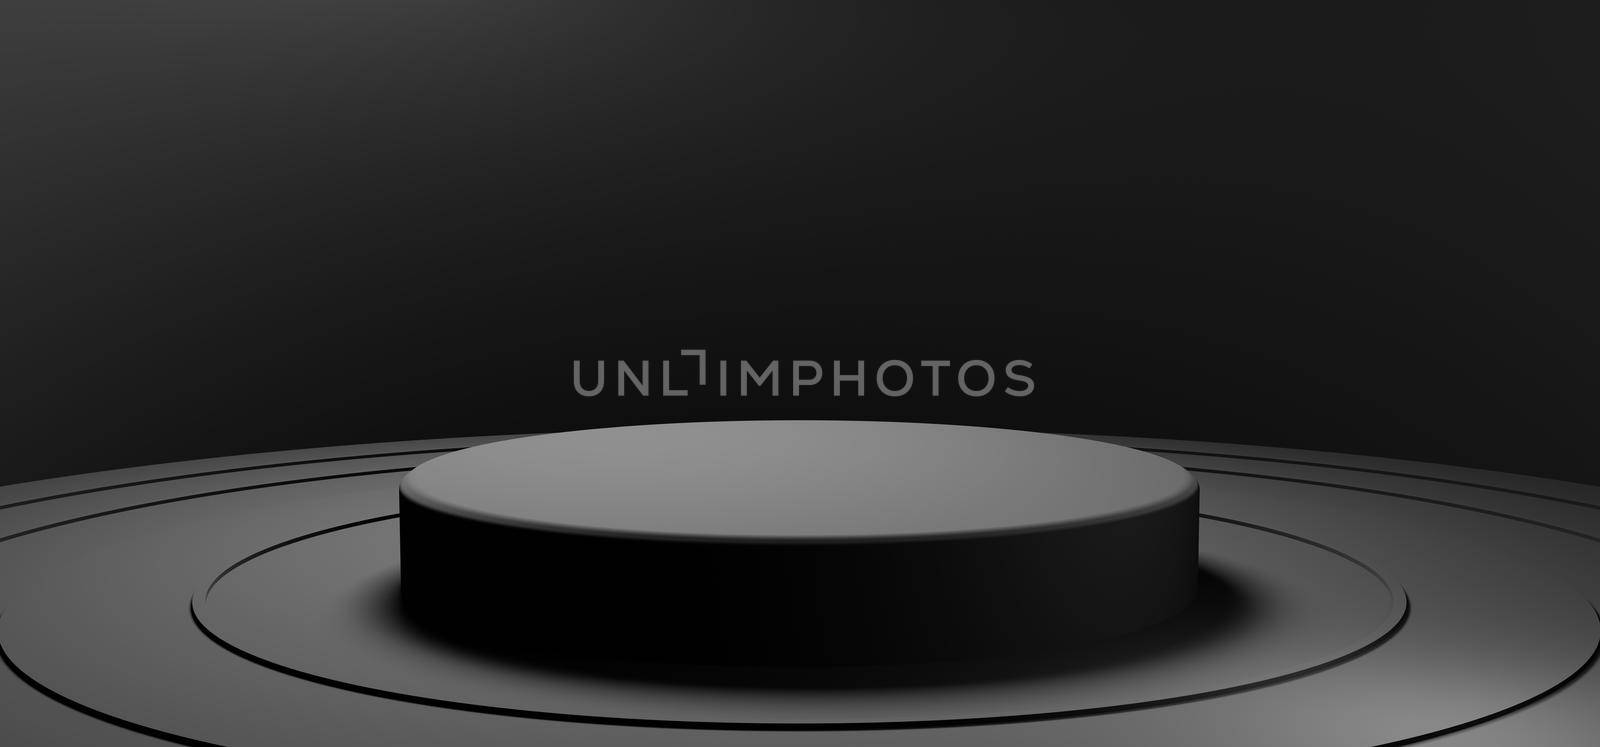 Minimal black round product podium showcase stage on circular background. Abstract object and business advertising concept. 3D illustration rendering by MiniStocker